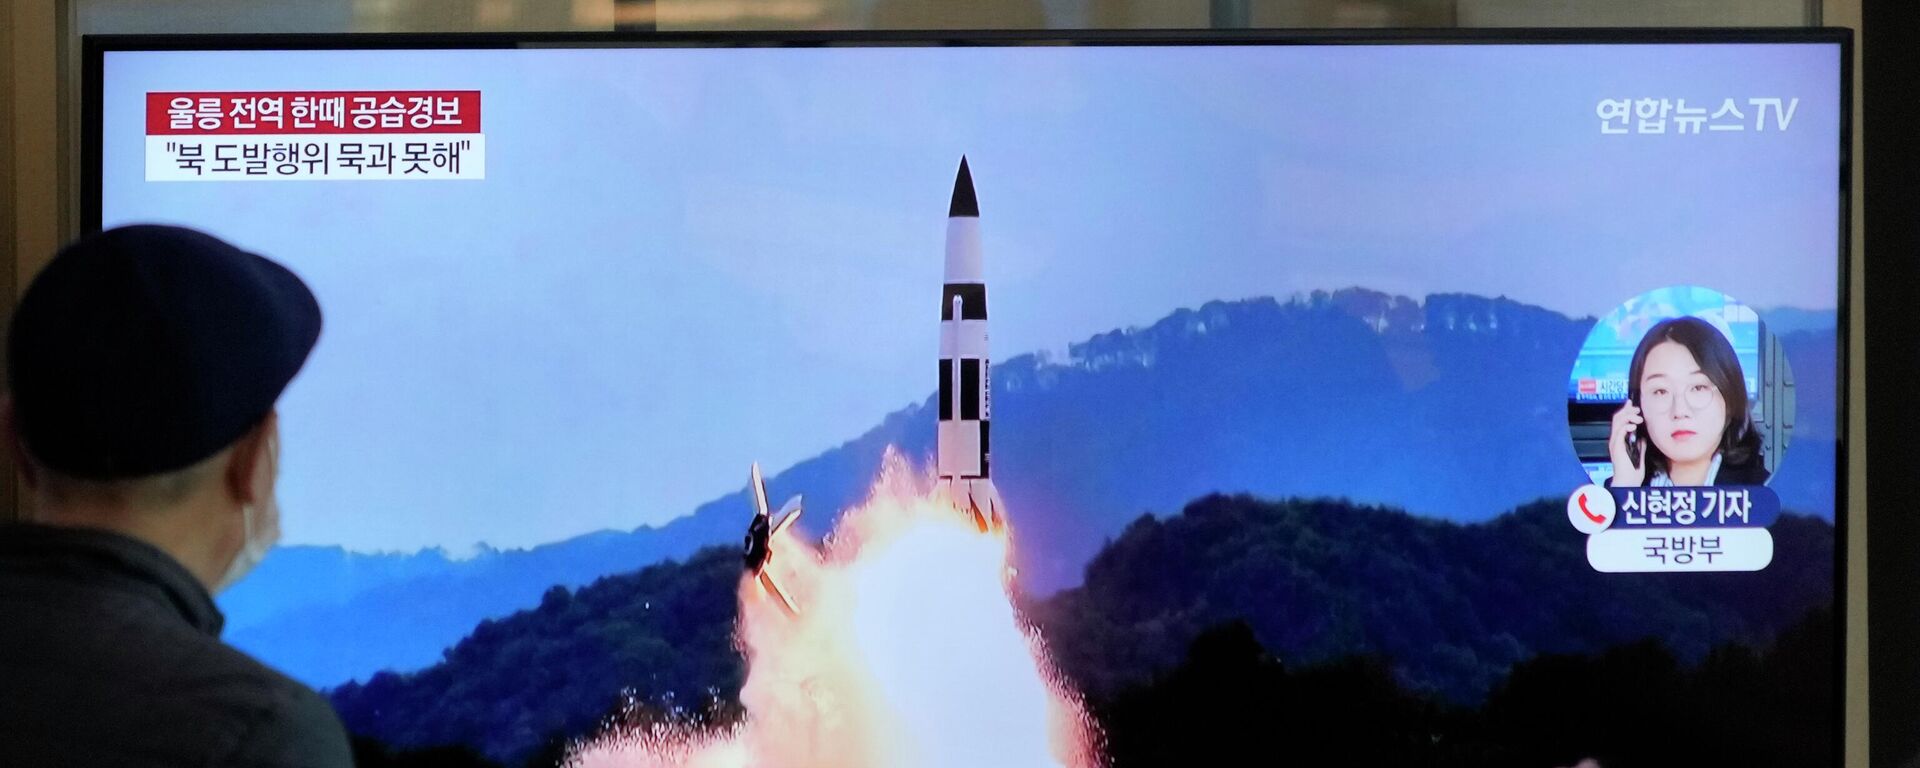 A TV screen shows a file image of North Korea's missile launch during a news program at the Seoul Railway Station in Seoul, South Korea, Wednesday, Nov. 2, 2022. South Korea says it has issued an air raid alert for residents on an island off its eastern coast after North Korea fired a few missiles toward the sea - Sputnik International, 1920, 20.02.2023